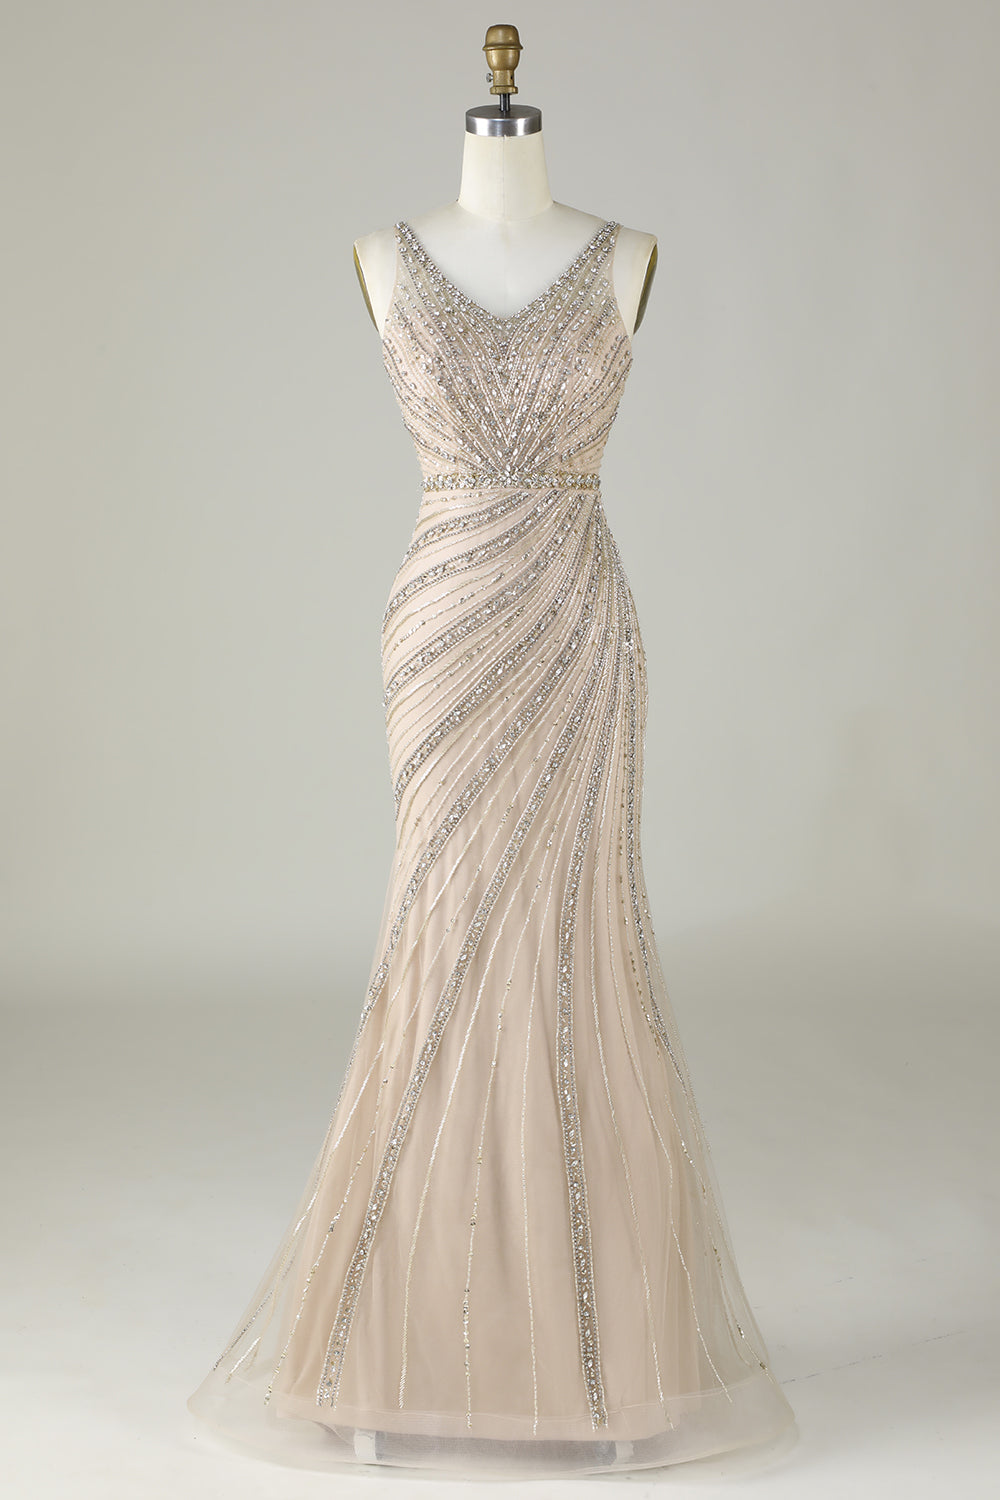 Sparkly Champagne Beaded Mermaid Long Prom Dress with Wrap